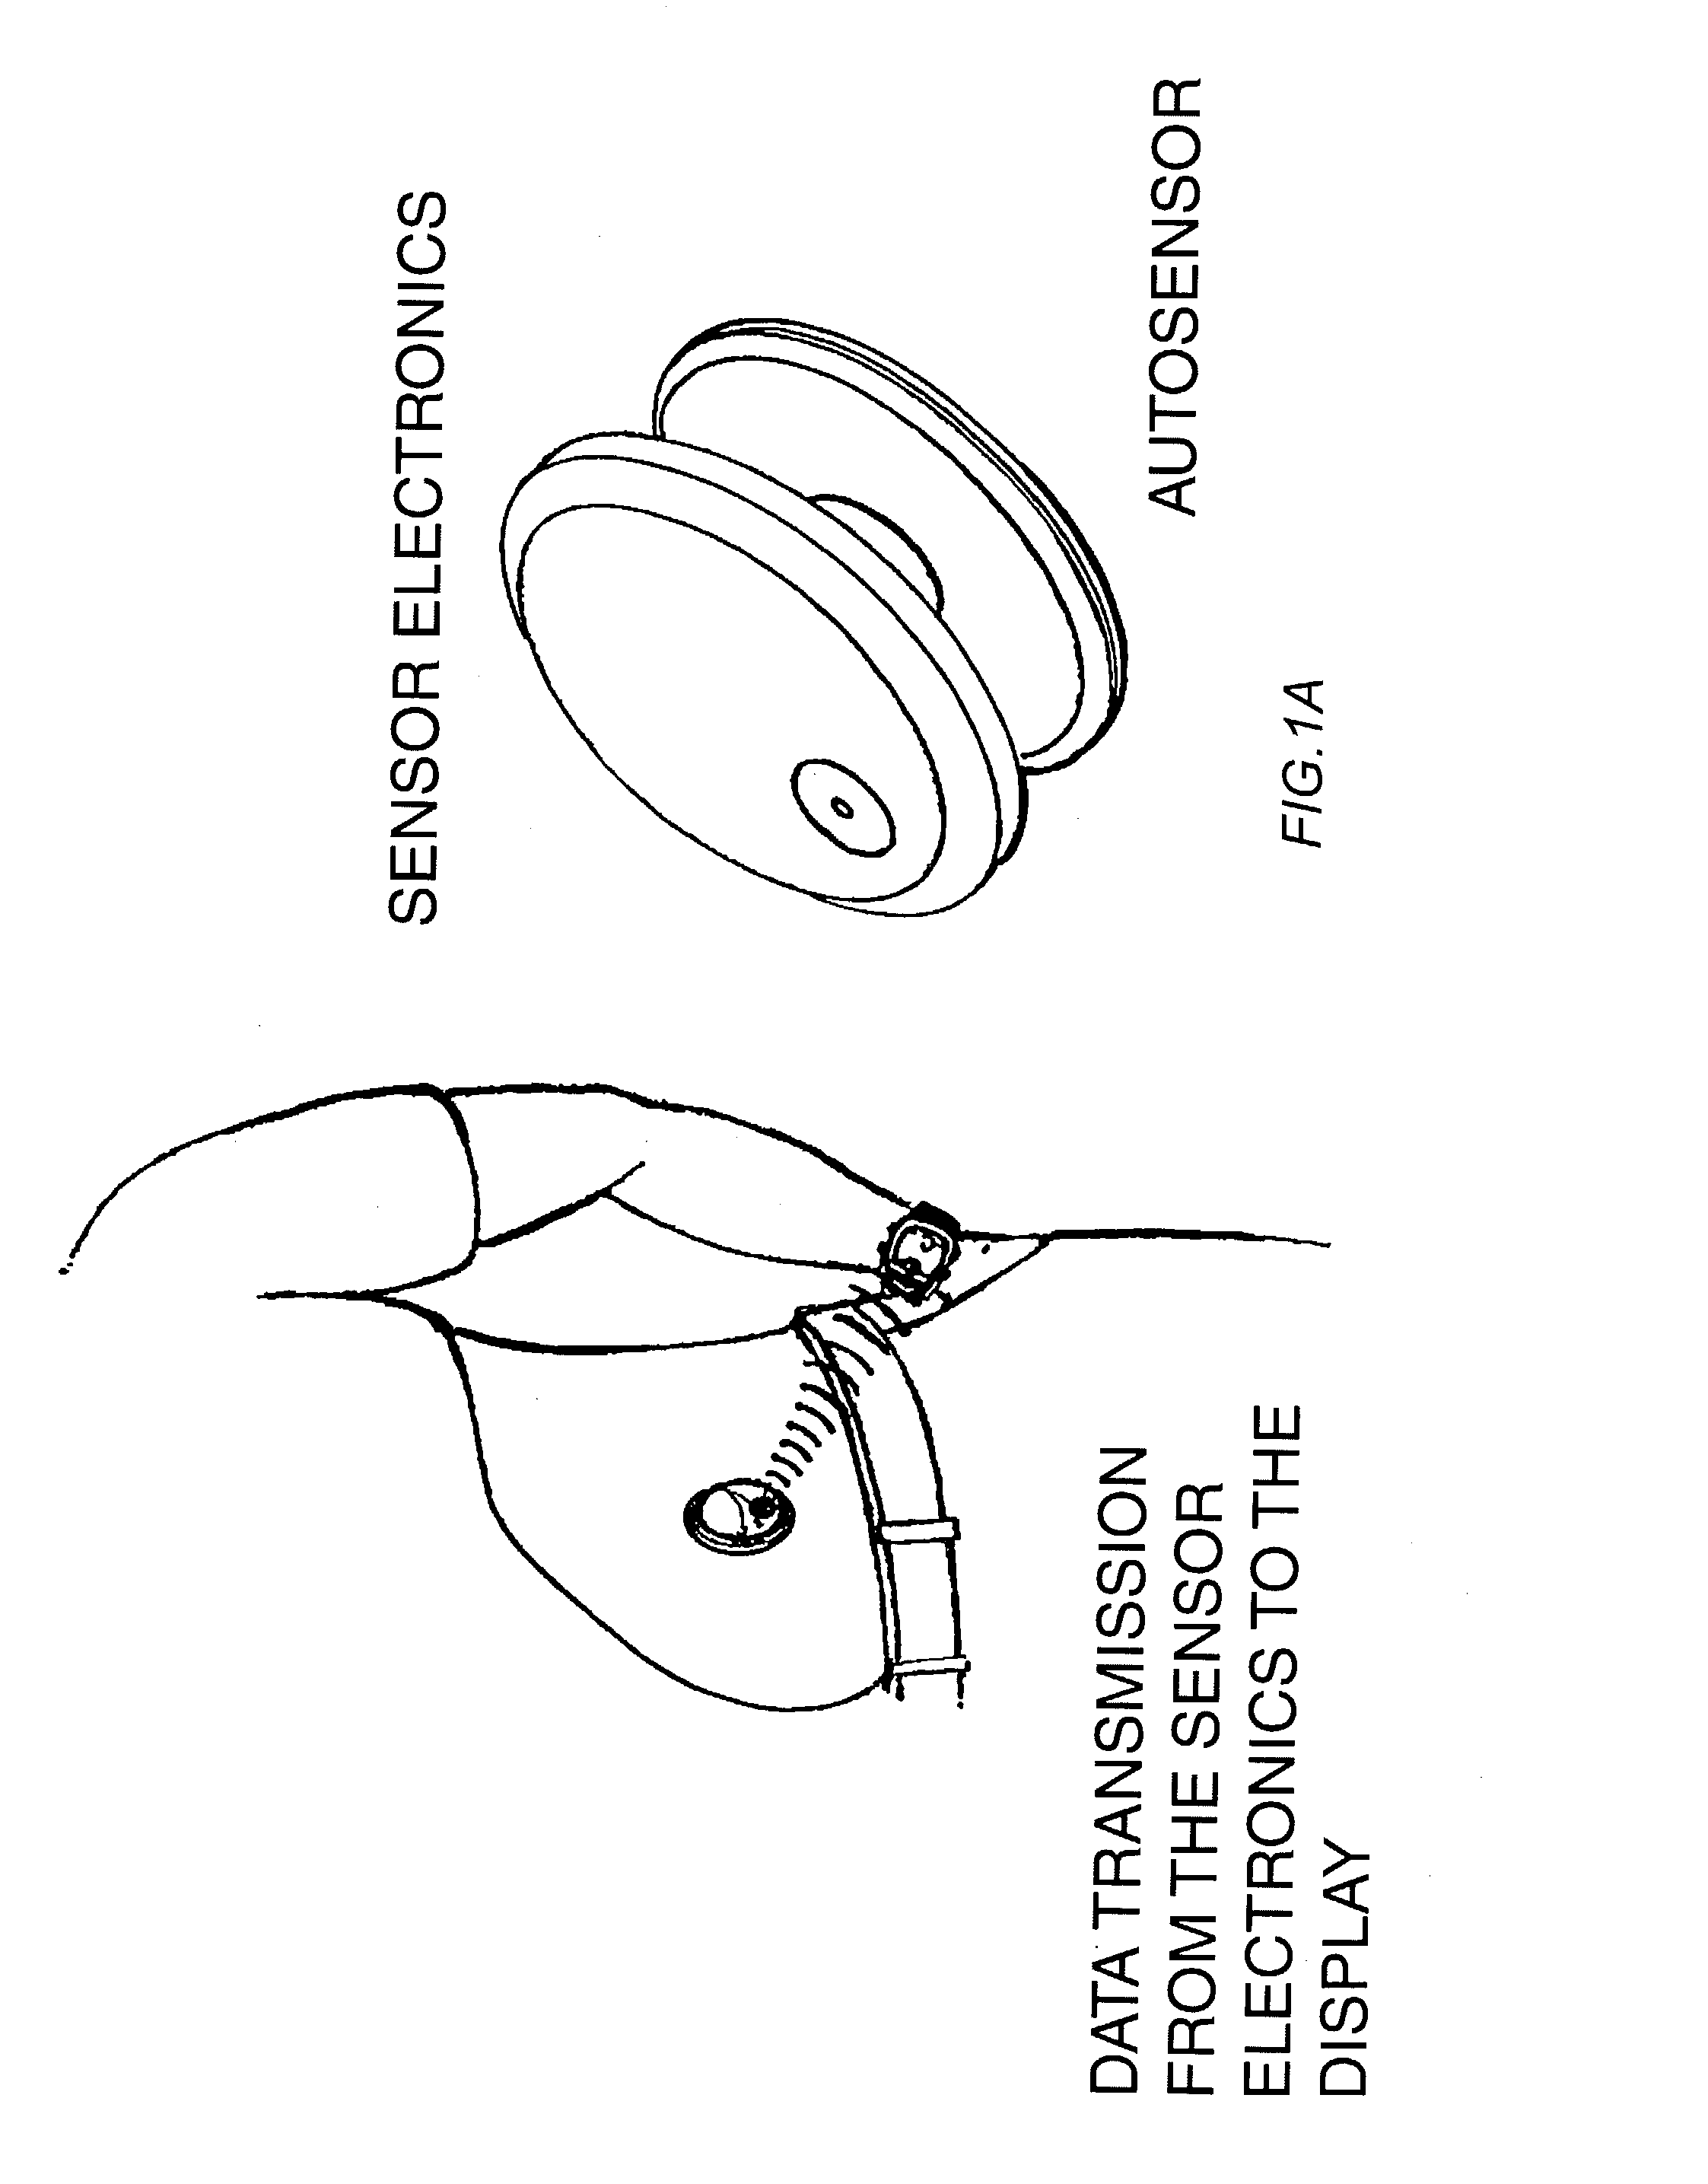 Devices and methods for frequent measurement of an analyte present in a biological system